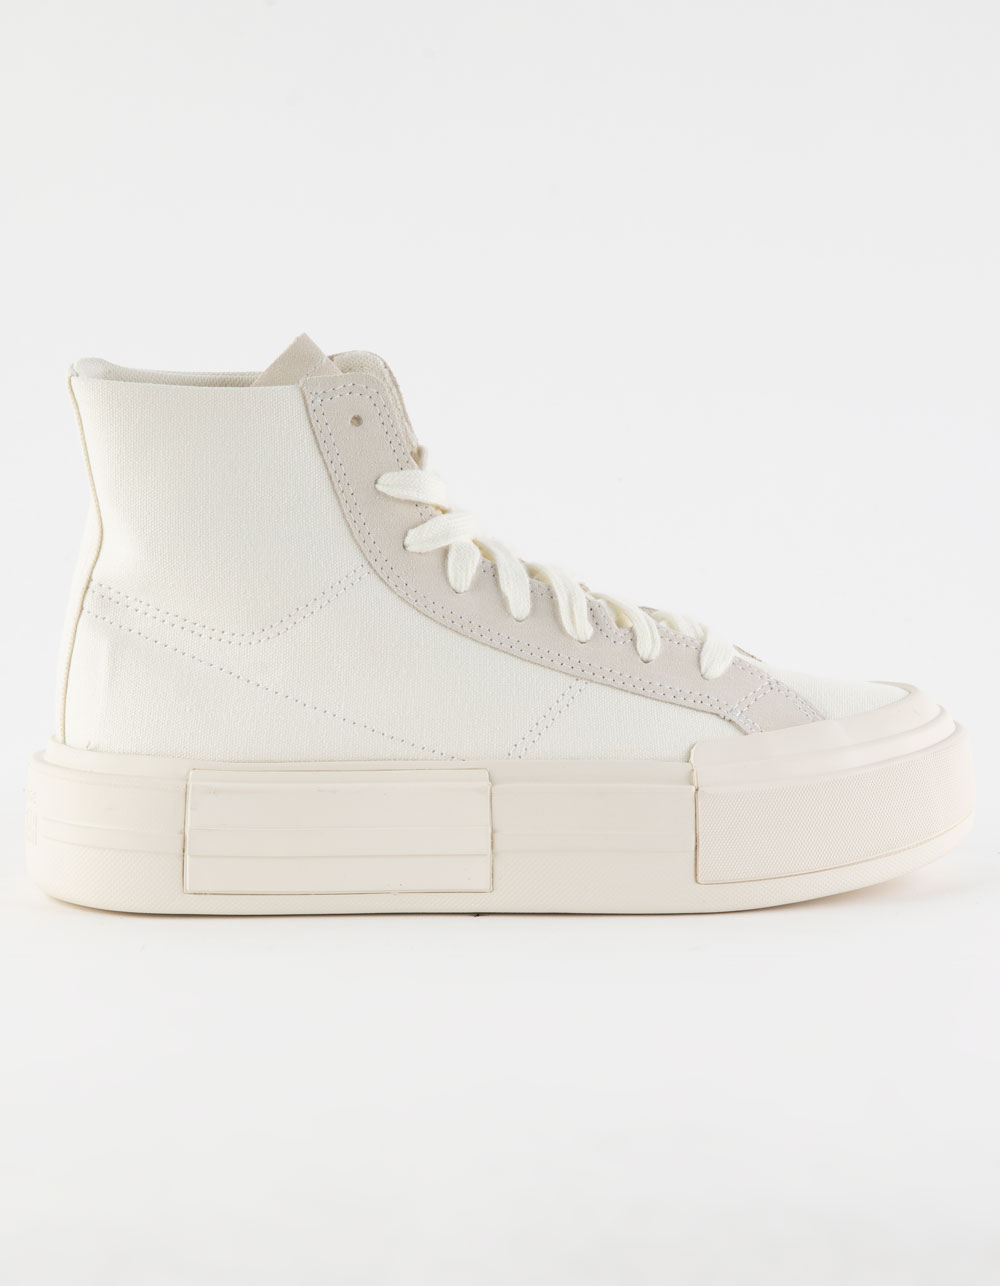 CONVERSE Chuck Taylor All Star Cruise Womens High Top Shoes - WHITE ...